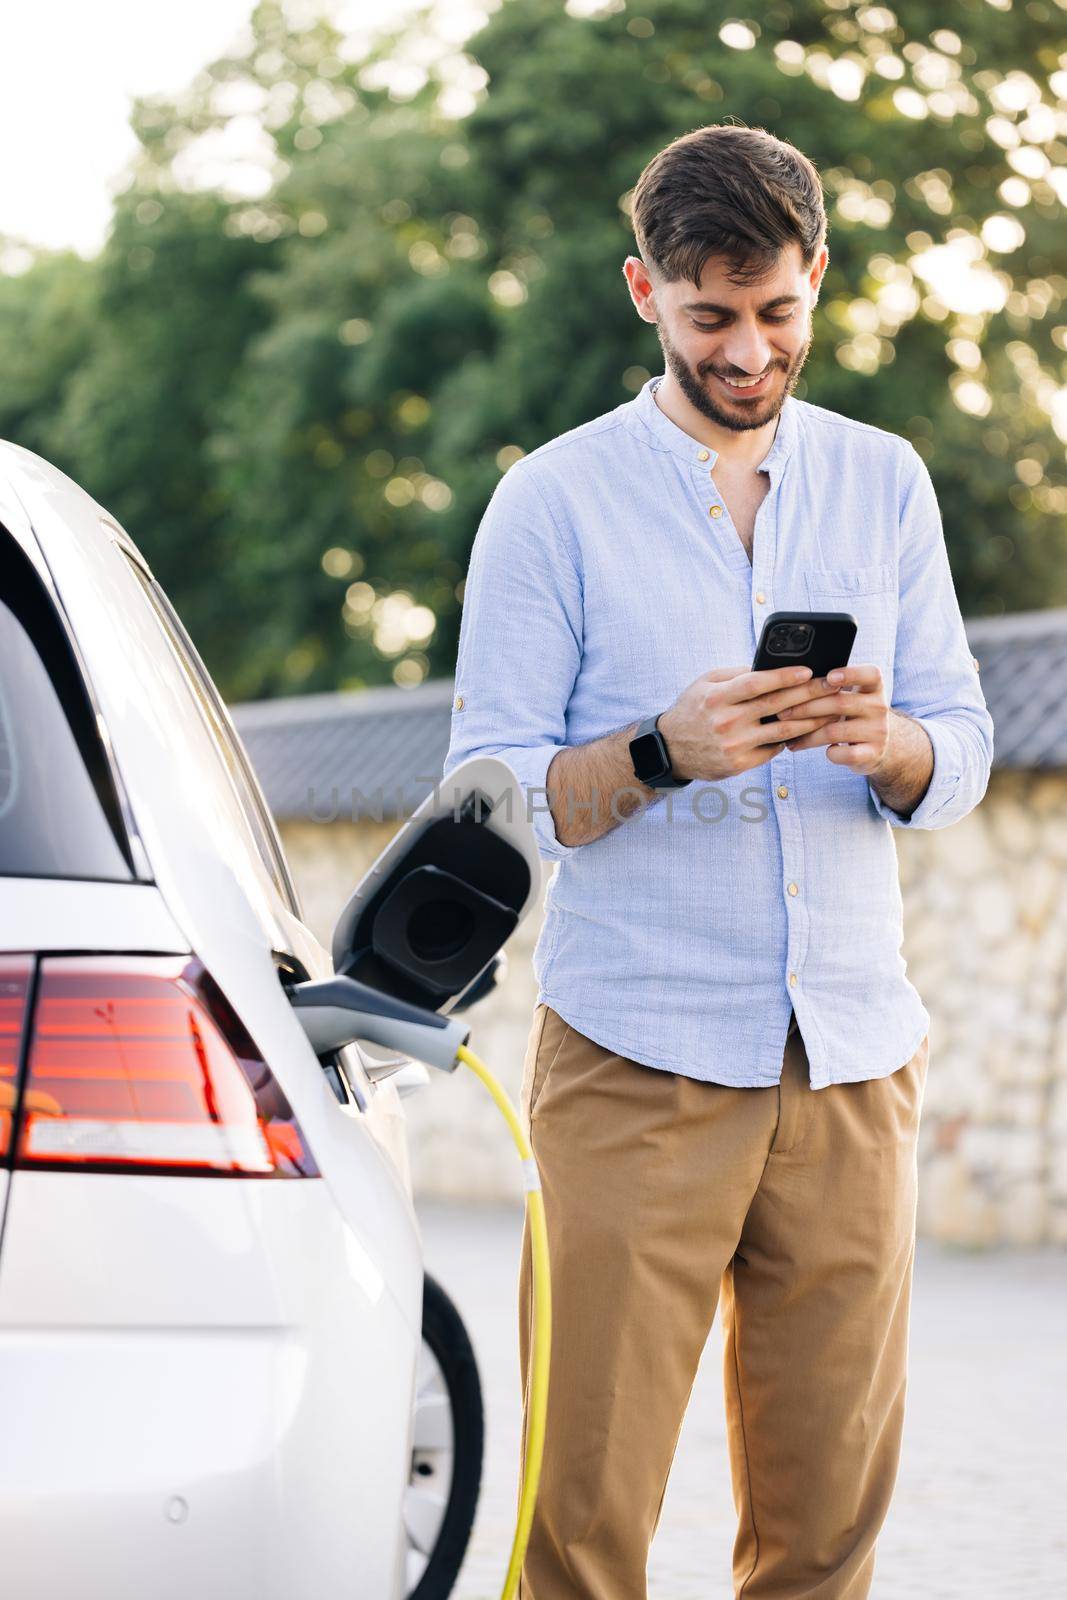 Bearded man using smart phone and waiting power supply connect to electric vehicles for charging the battery in car. Plug charging an Electric car from charging station.